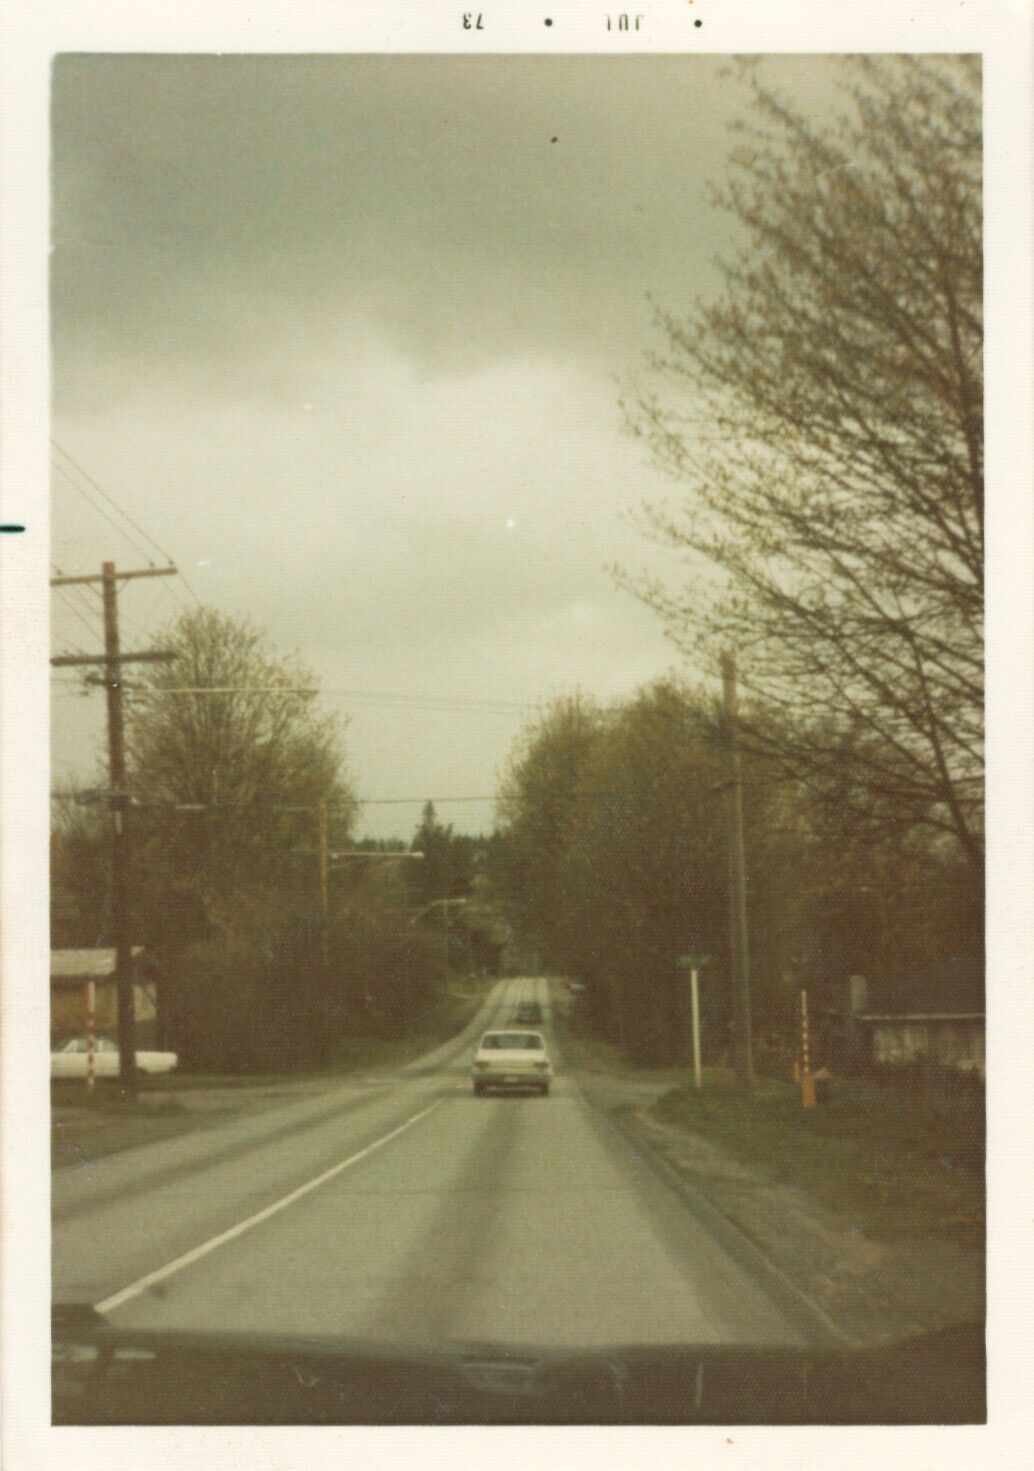 Vintage Photograph Driving rural route on overcast day in 1973